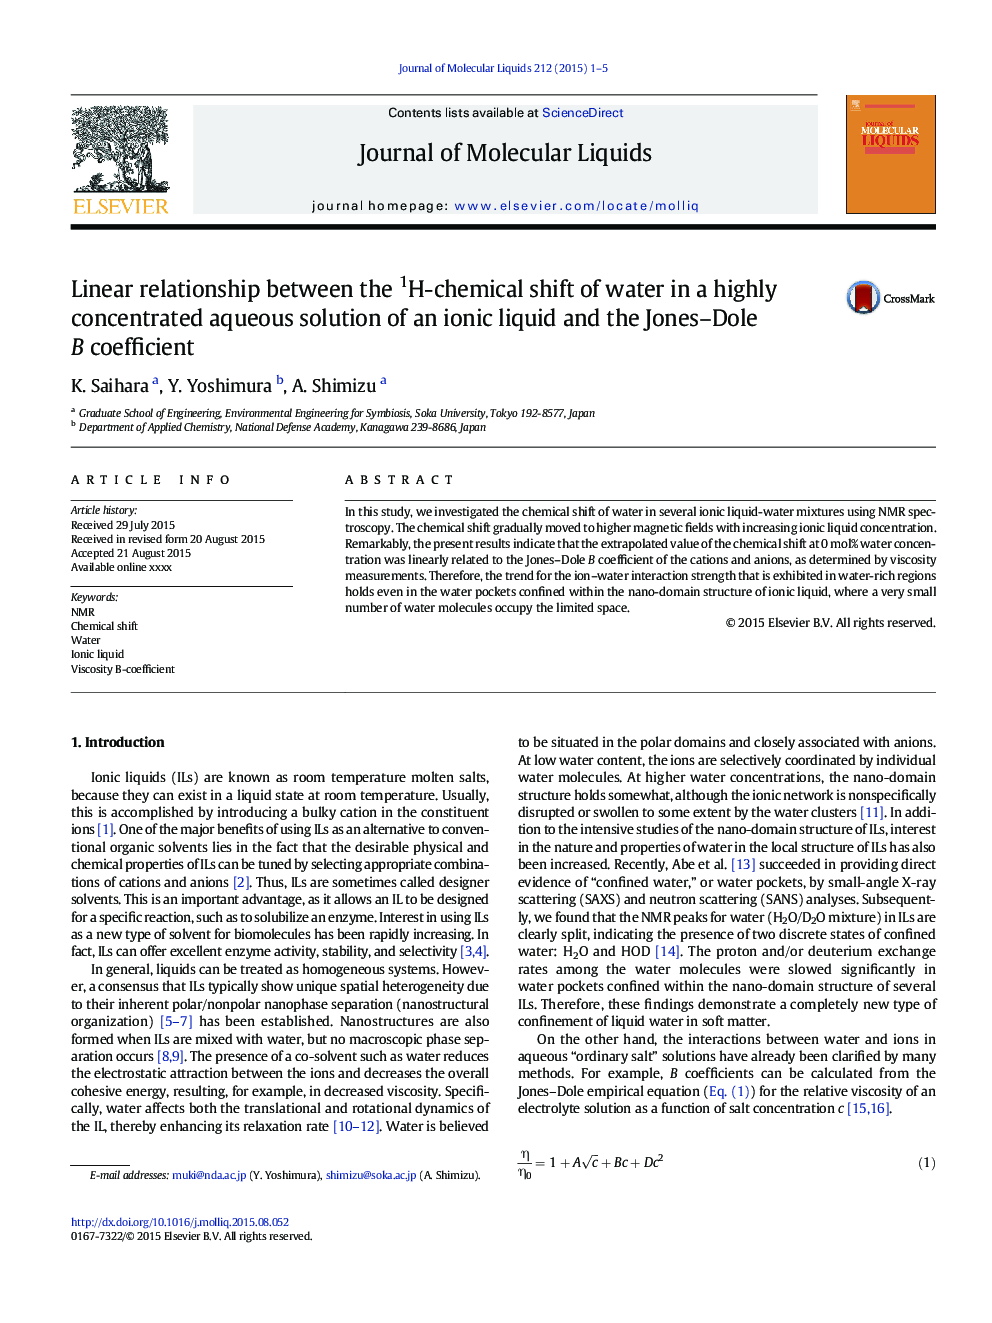 Linear relationship between the 1H-chemical shift of water in a highly concentrated aqueous solution of an ionic liquid and the Jones-Dole B coefficient